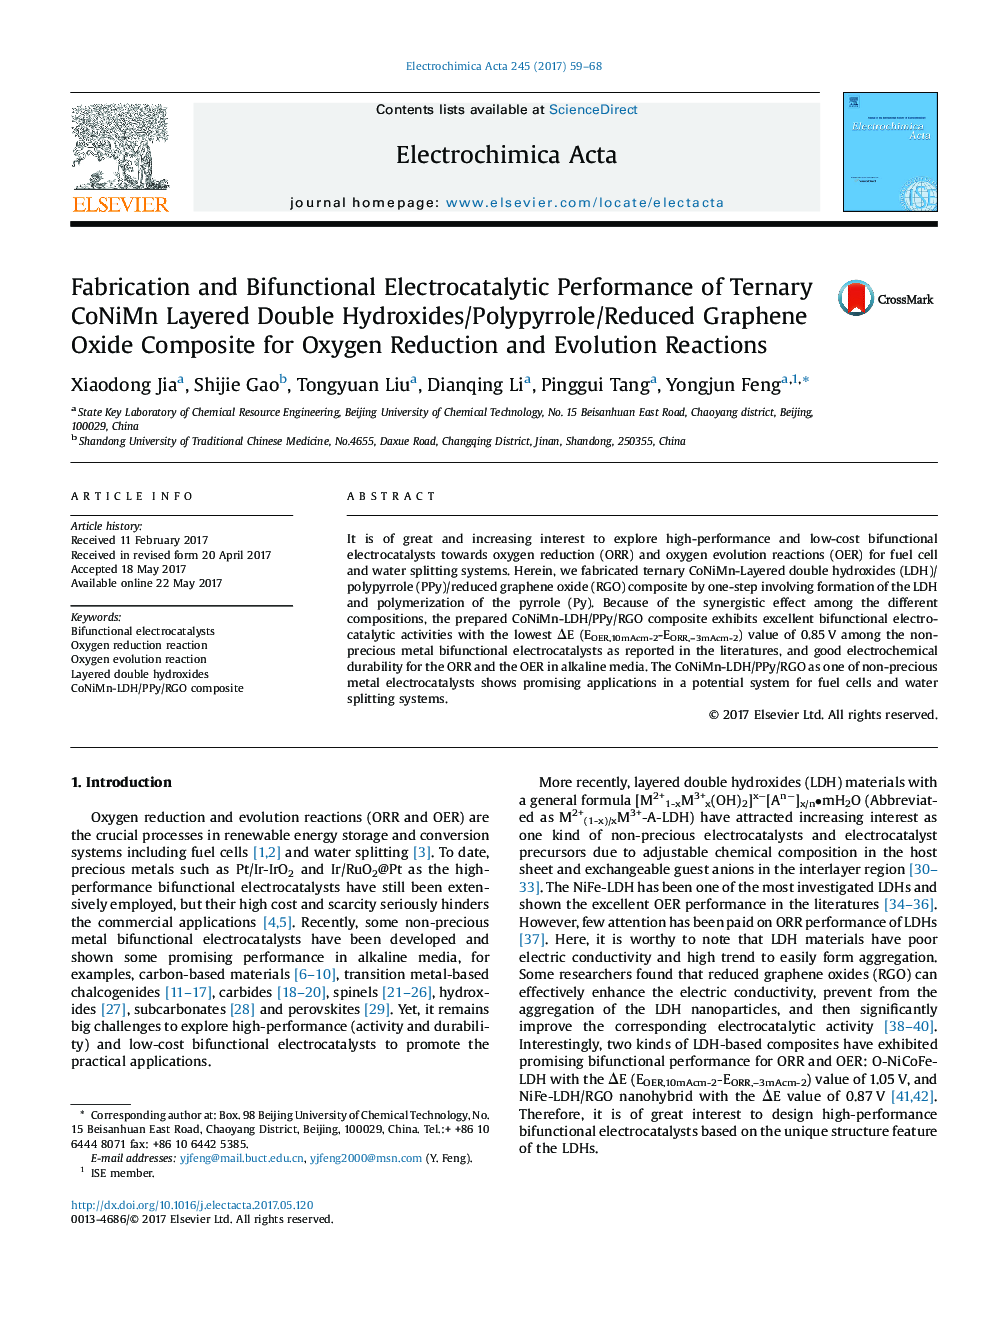 Fabrication and Bifunctional Electrocatalytic Performance of Ternary CoNiMn Layered Double Hydroxides/Polypyrrole/Reduced Graphene Oxide Composite for Oxygen Reduction and Evolution Reactions